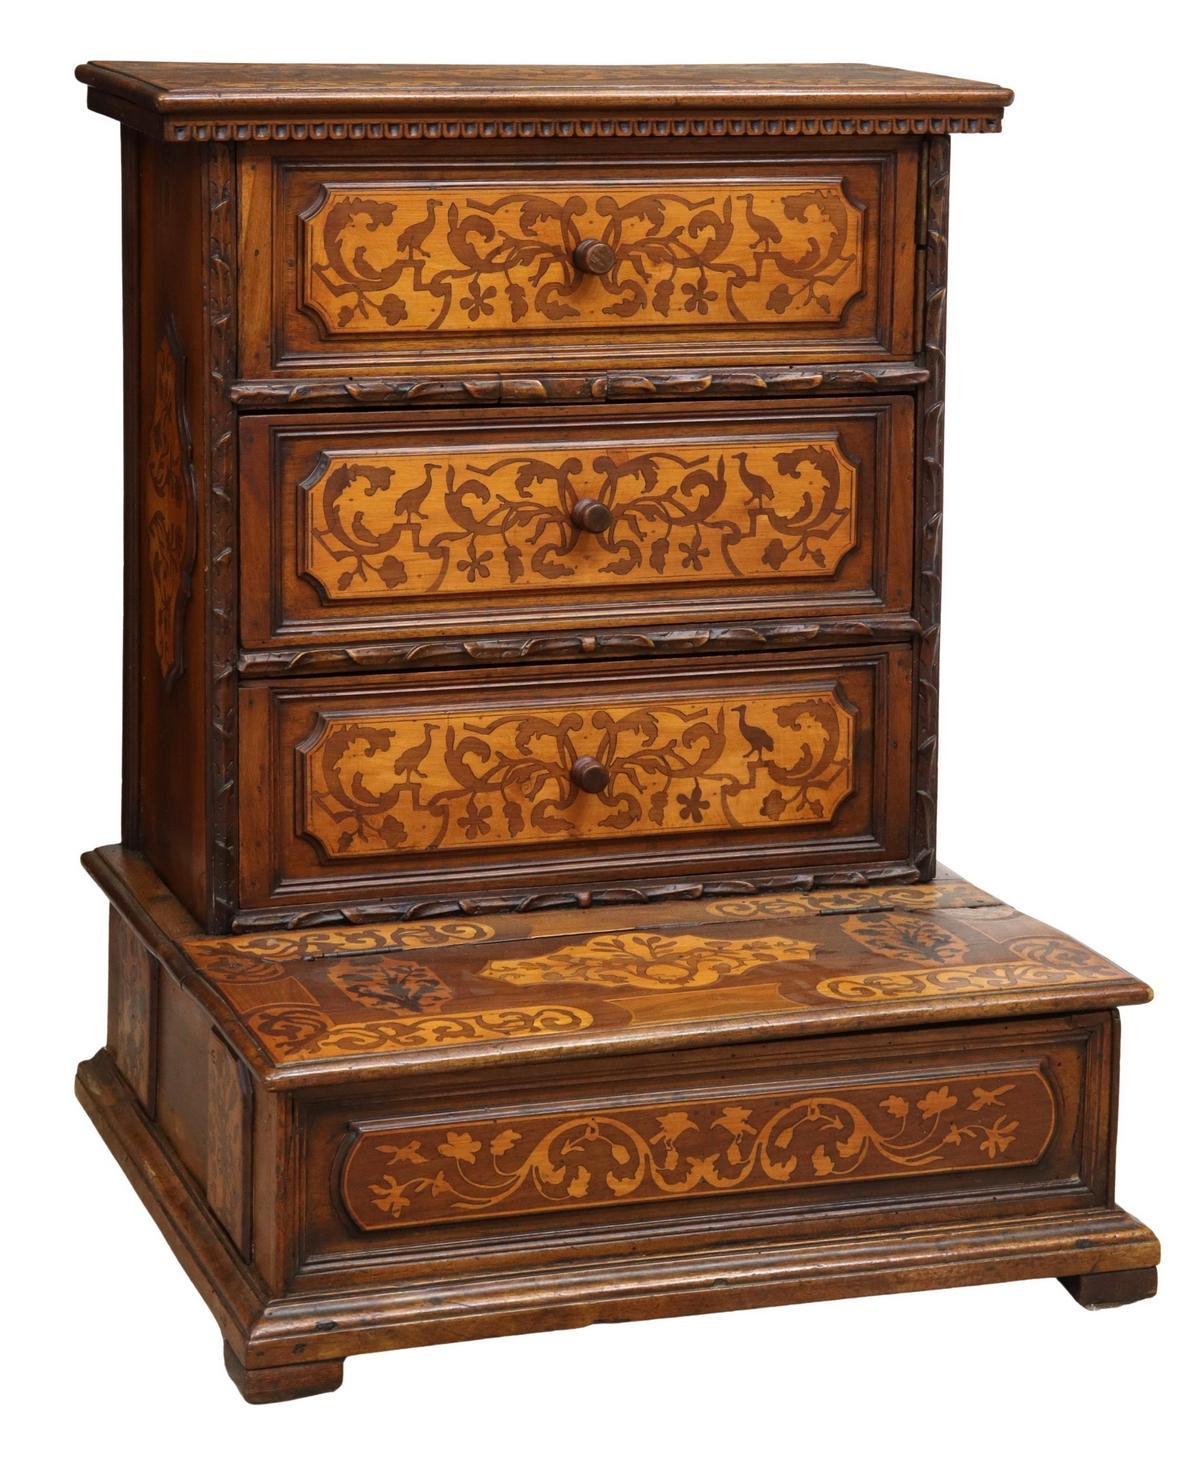 French prayer kneeler (prie-dieu), 19thc., of carved marquetry case, having hinge top opening to velvet lined interior, over two drawers, all above protruding base with lift top, rising on bracket feet, retaining small-stamped disk marked Chardonnay